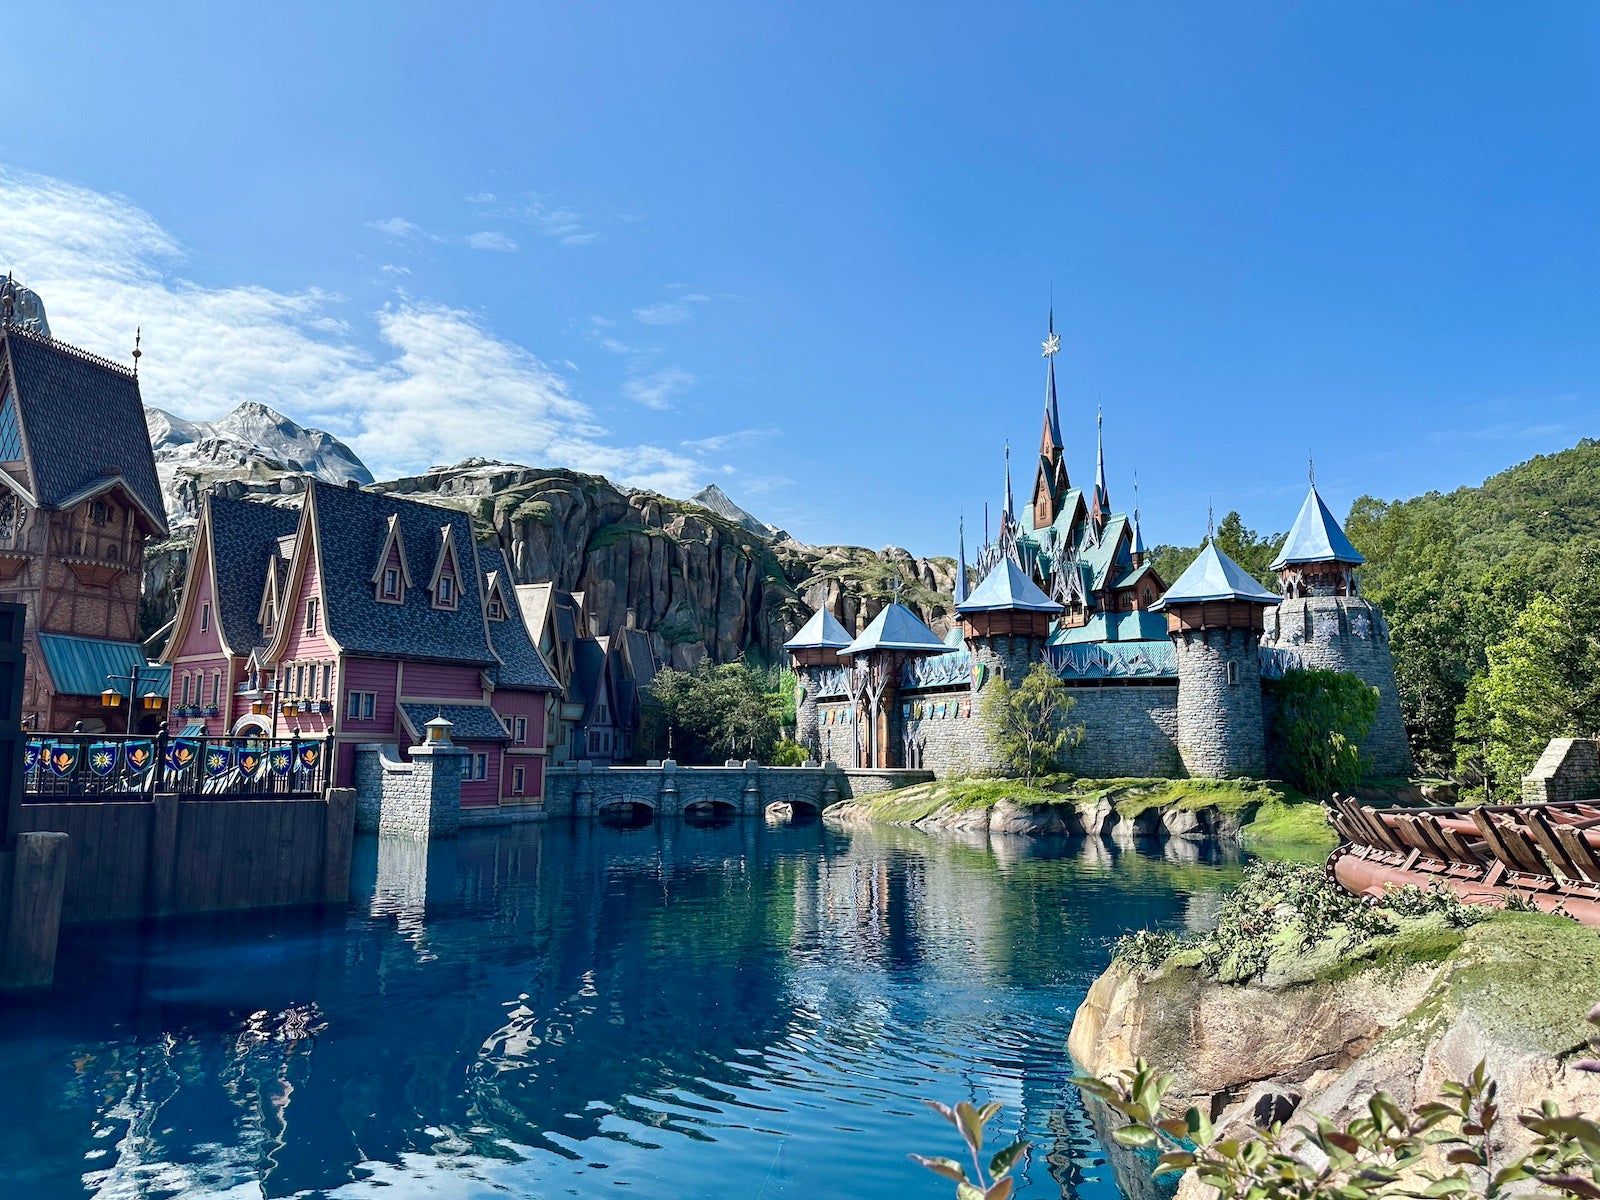 Explore World of Frozen at Hong Kong Disneyland with the team who made ...